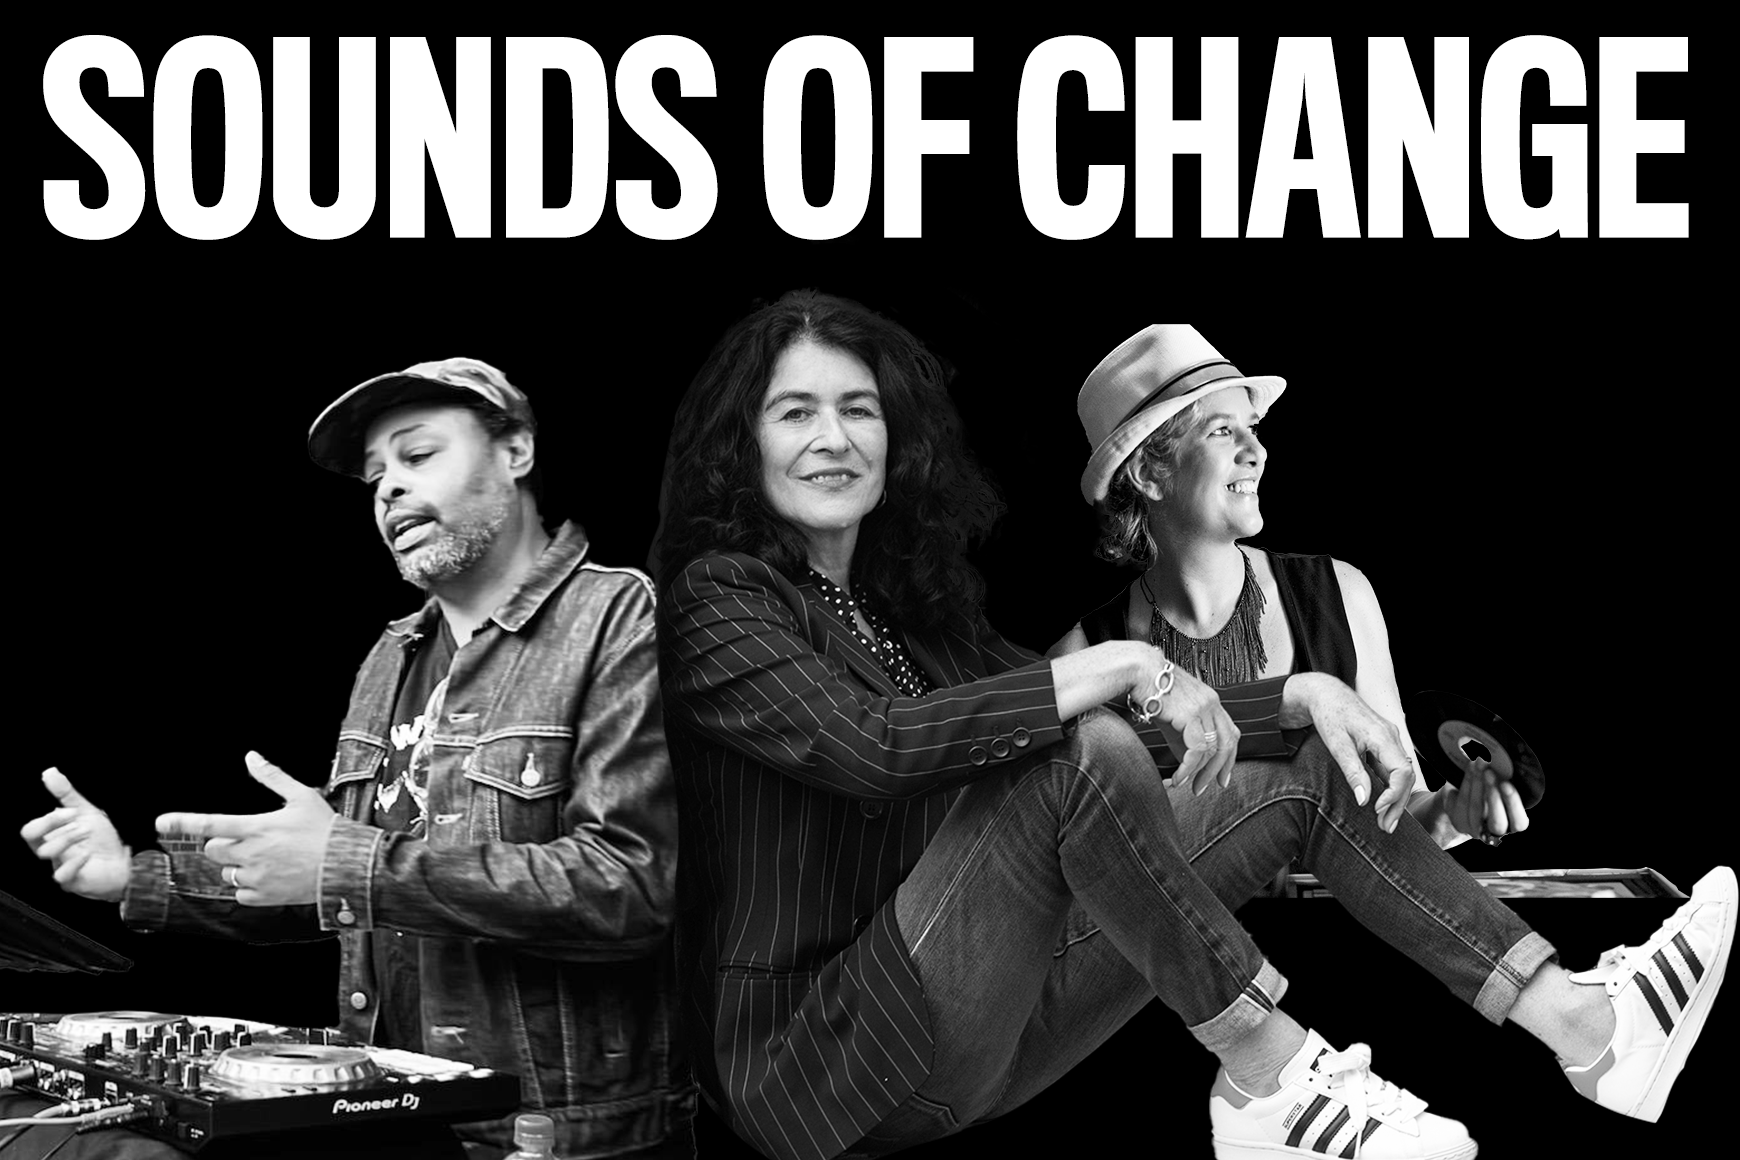 Black and White image with bold text "Sounds of Change" and collage of DJ Misbehaviour, Operator Emz, and Janette Beckman